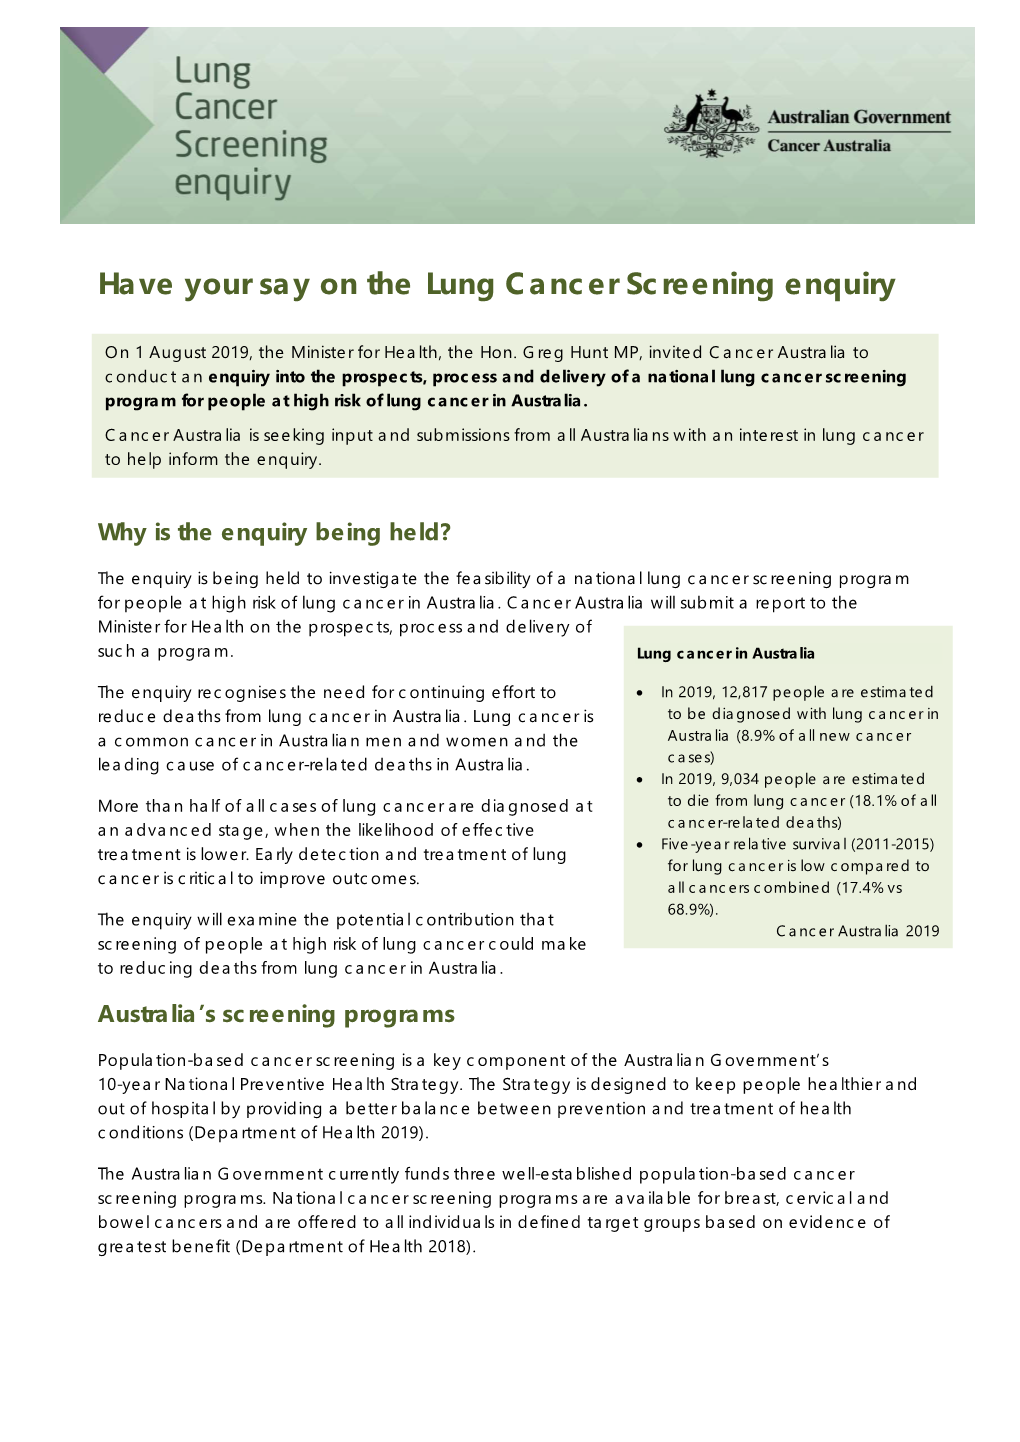 Have Your Say on the Lung Cancer Screening Enquiry